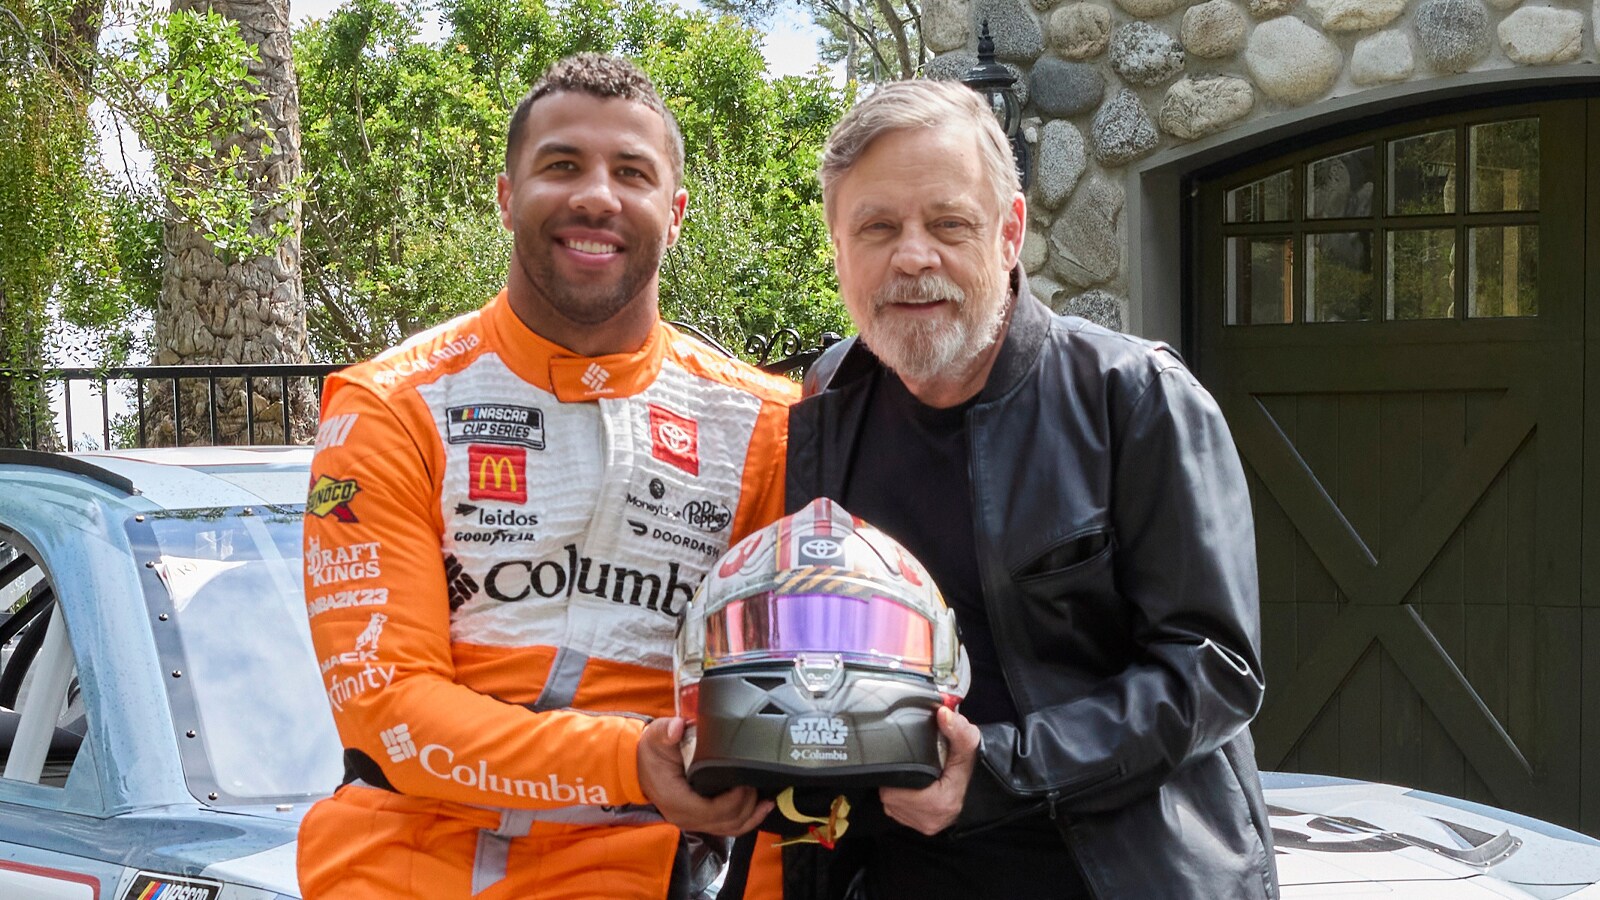 All Wings Report In: Columbia and NASCAR Team Up for Star Wars-Themed Car Wrap